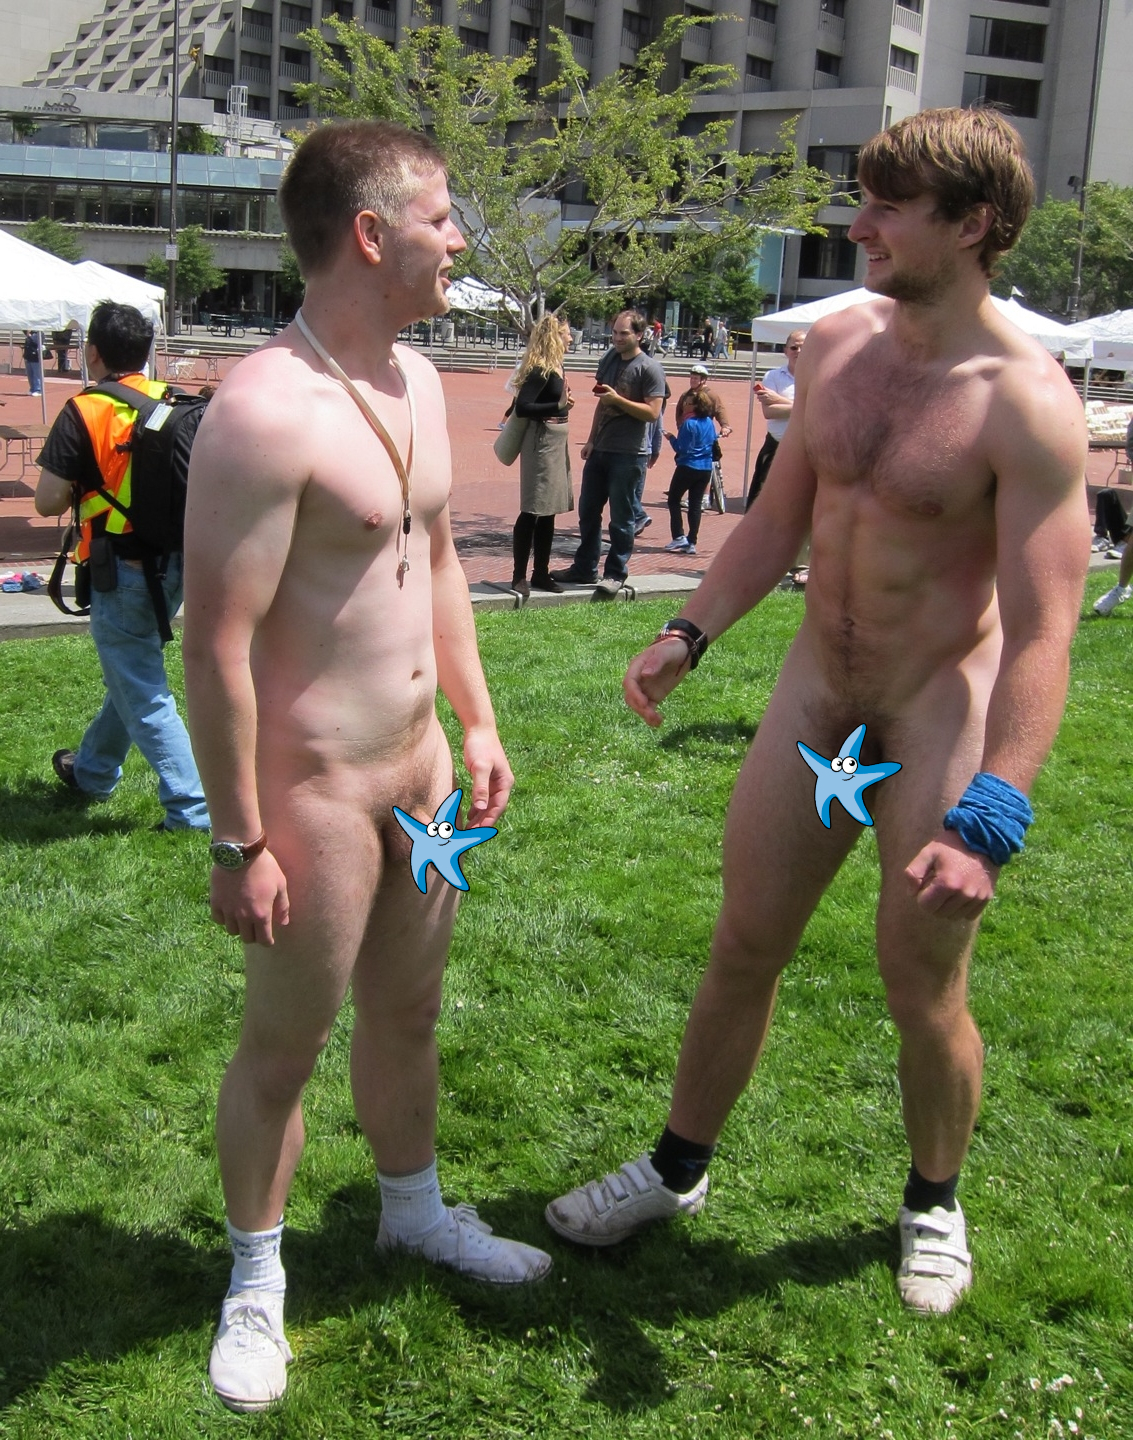 Two nude guys on a lawn